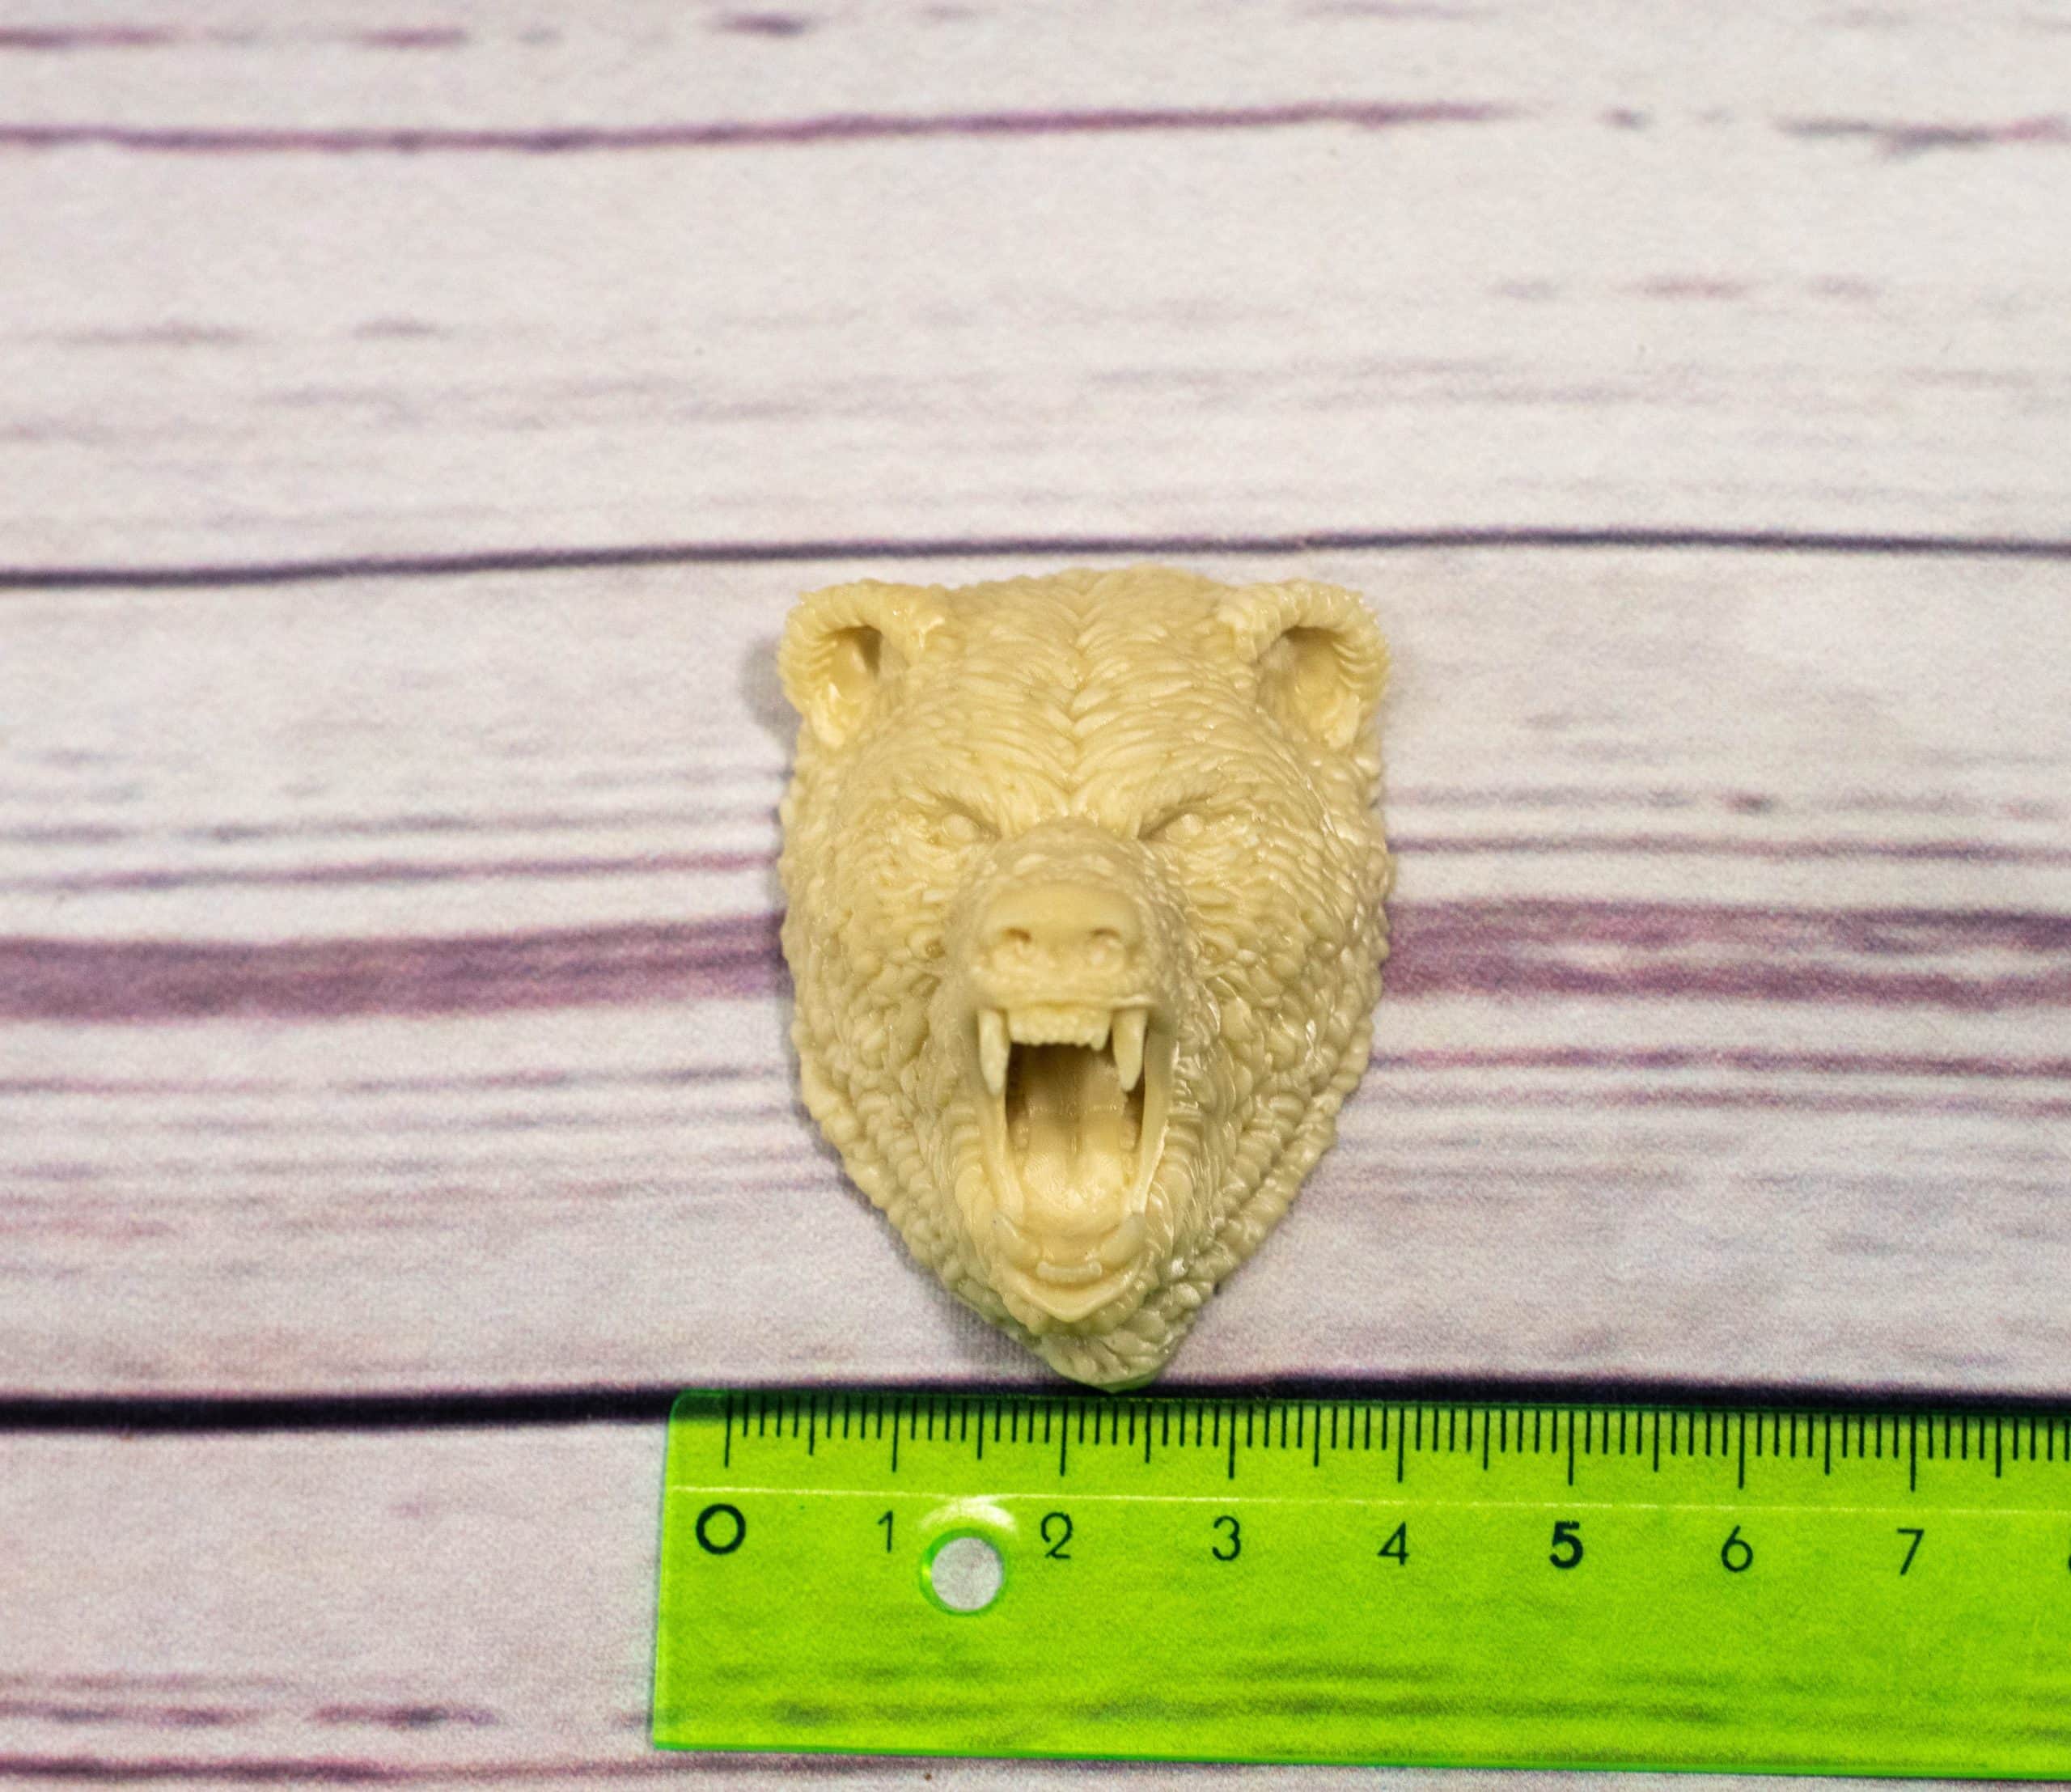 silicone mold face bear creating decorations and decorations